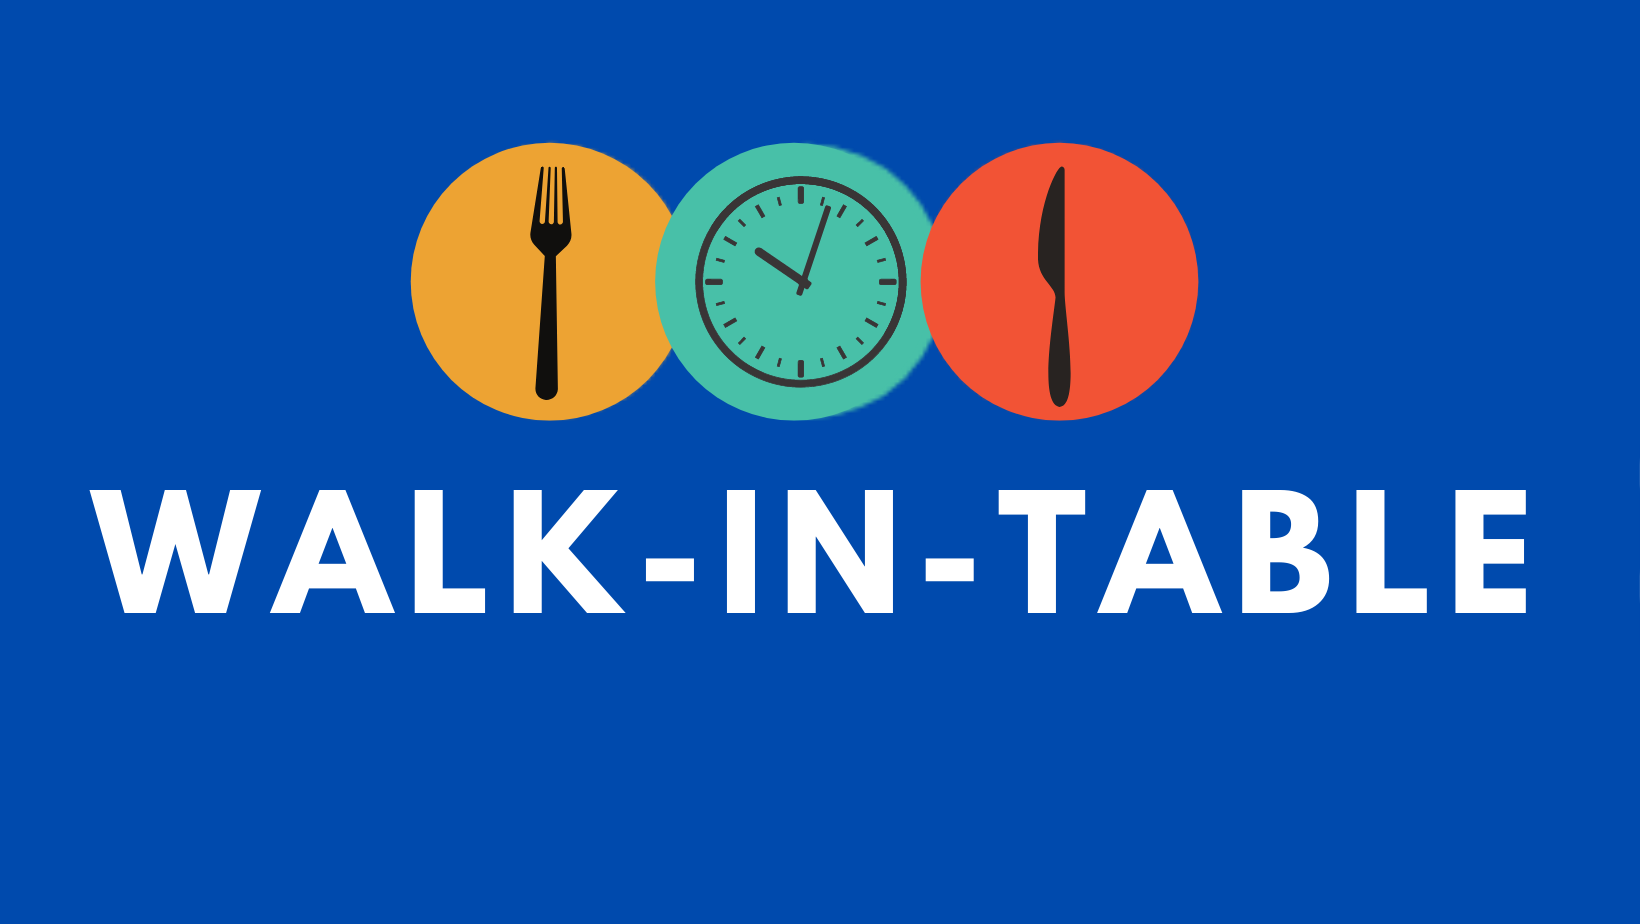 Walk-in-table launches its unique waiting list solution that makes scheduling a breeze